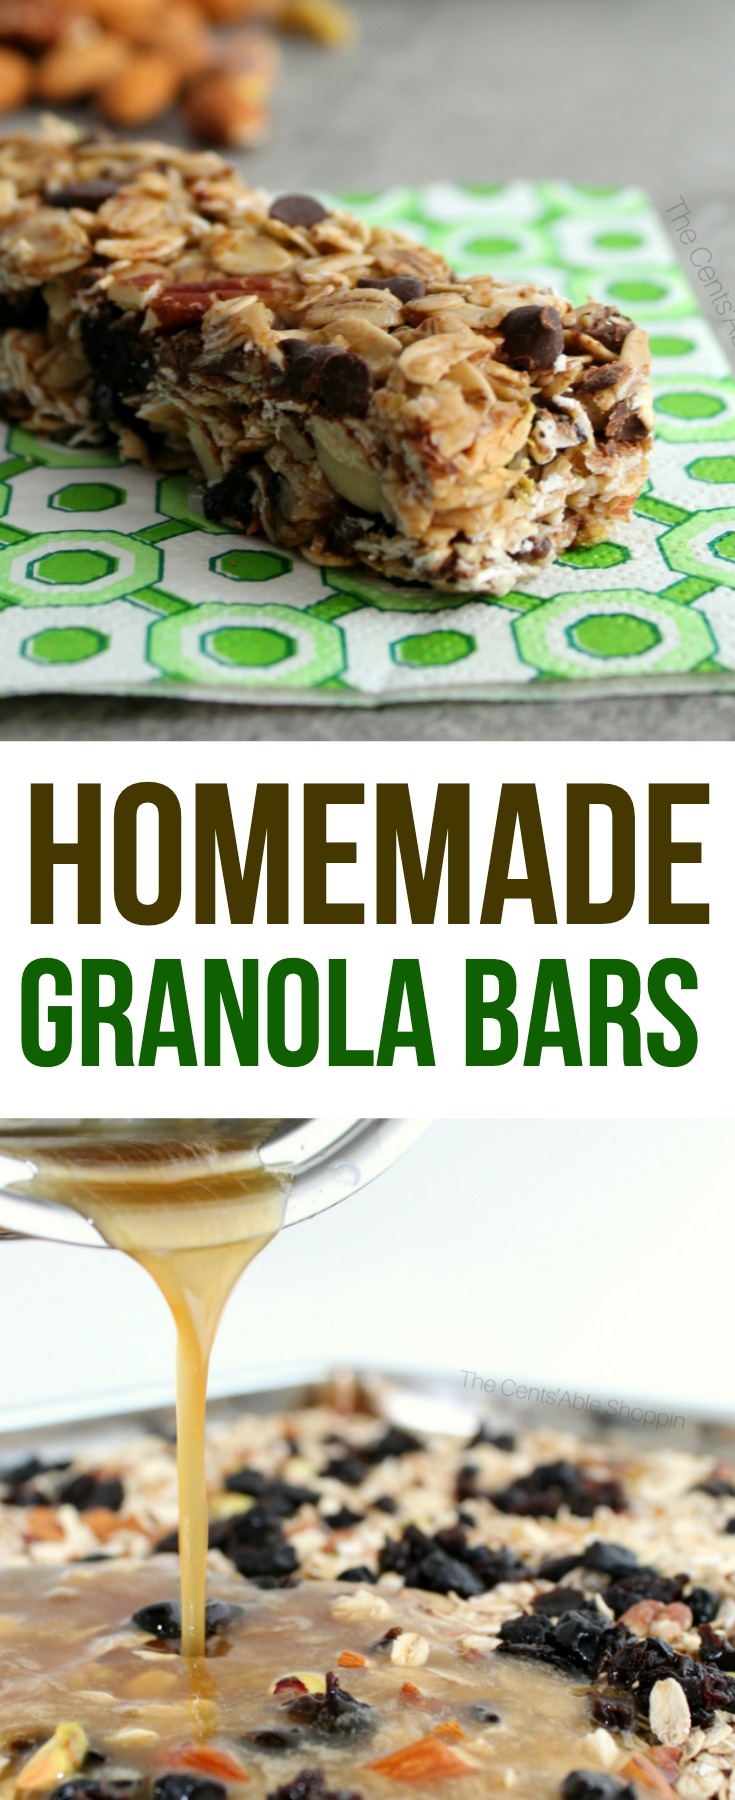 These homemade granola bars are delicious and healthier than any store bought variety. They're soft, chewy and adaptable using your favorite mix-ins!  #granola #bar #snack #healthy #homemade